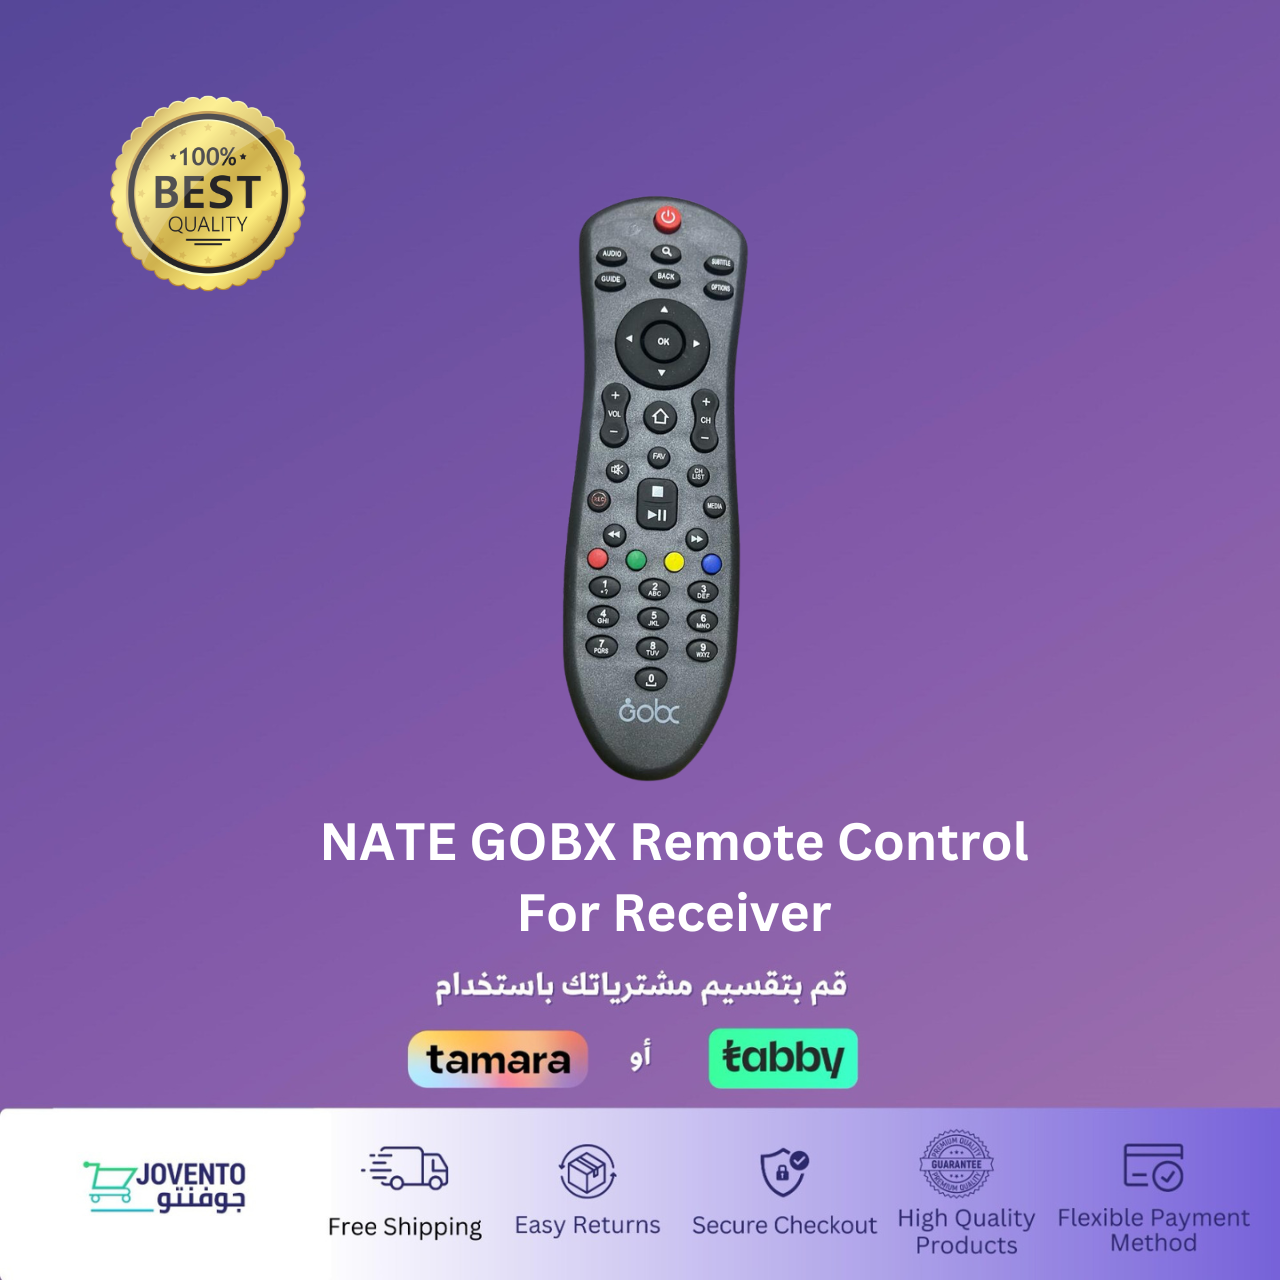 NATE GOBX Remote Control For Receiver